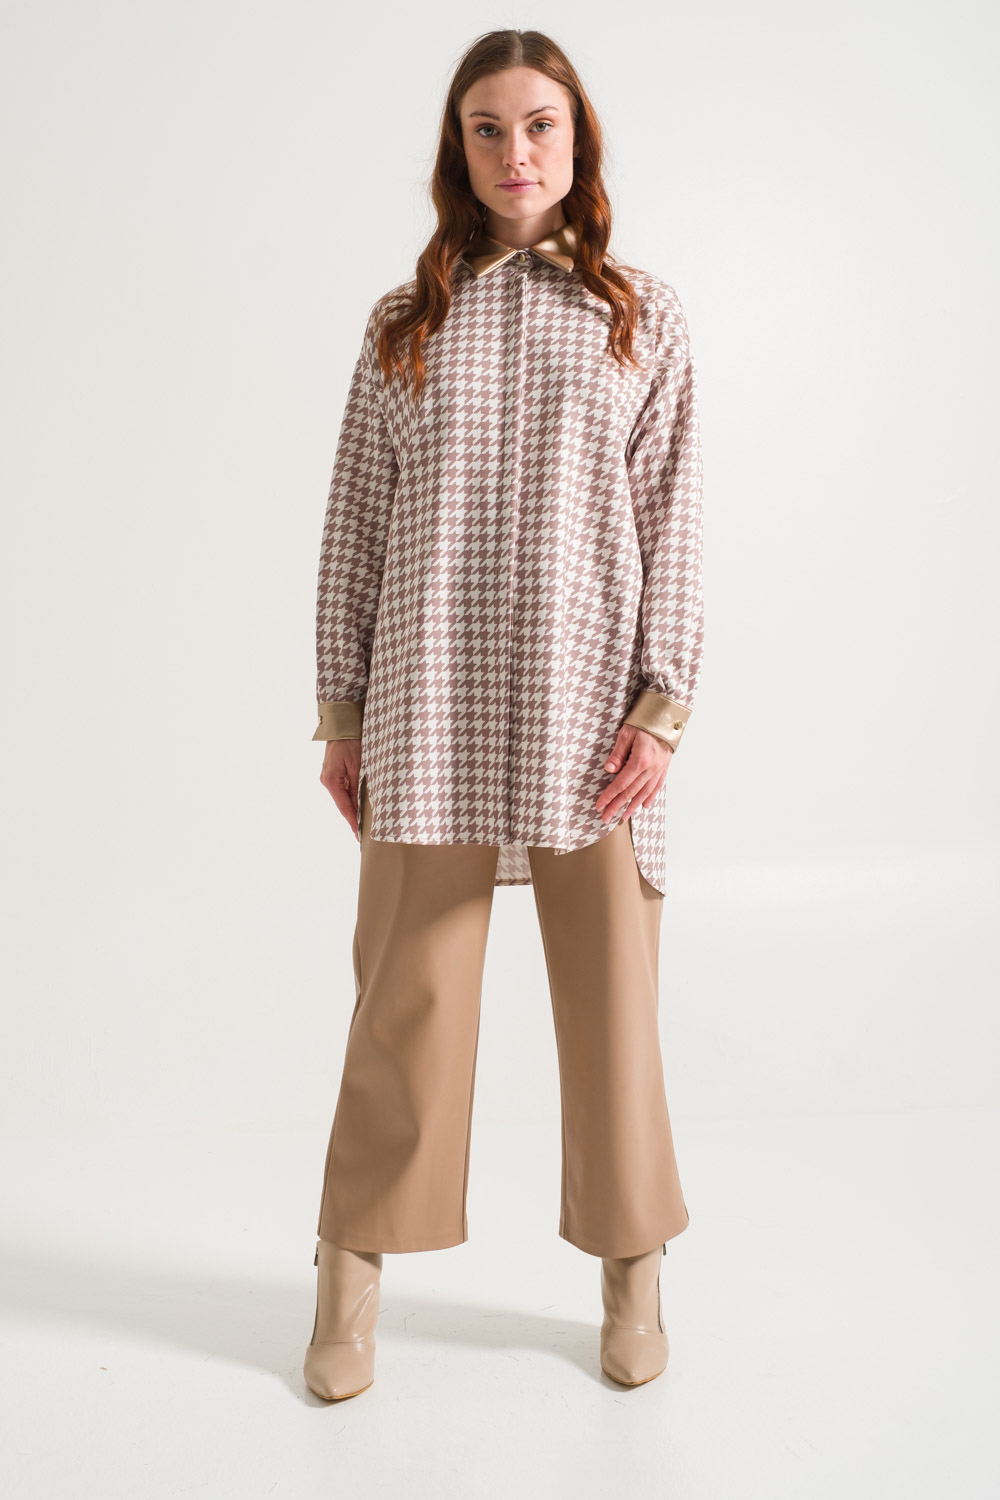 Goosefoot Patterned Beige Tunic with Hidden Buttons